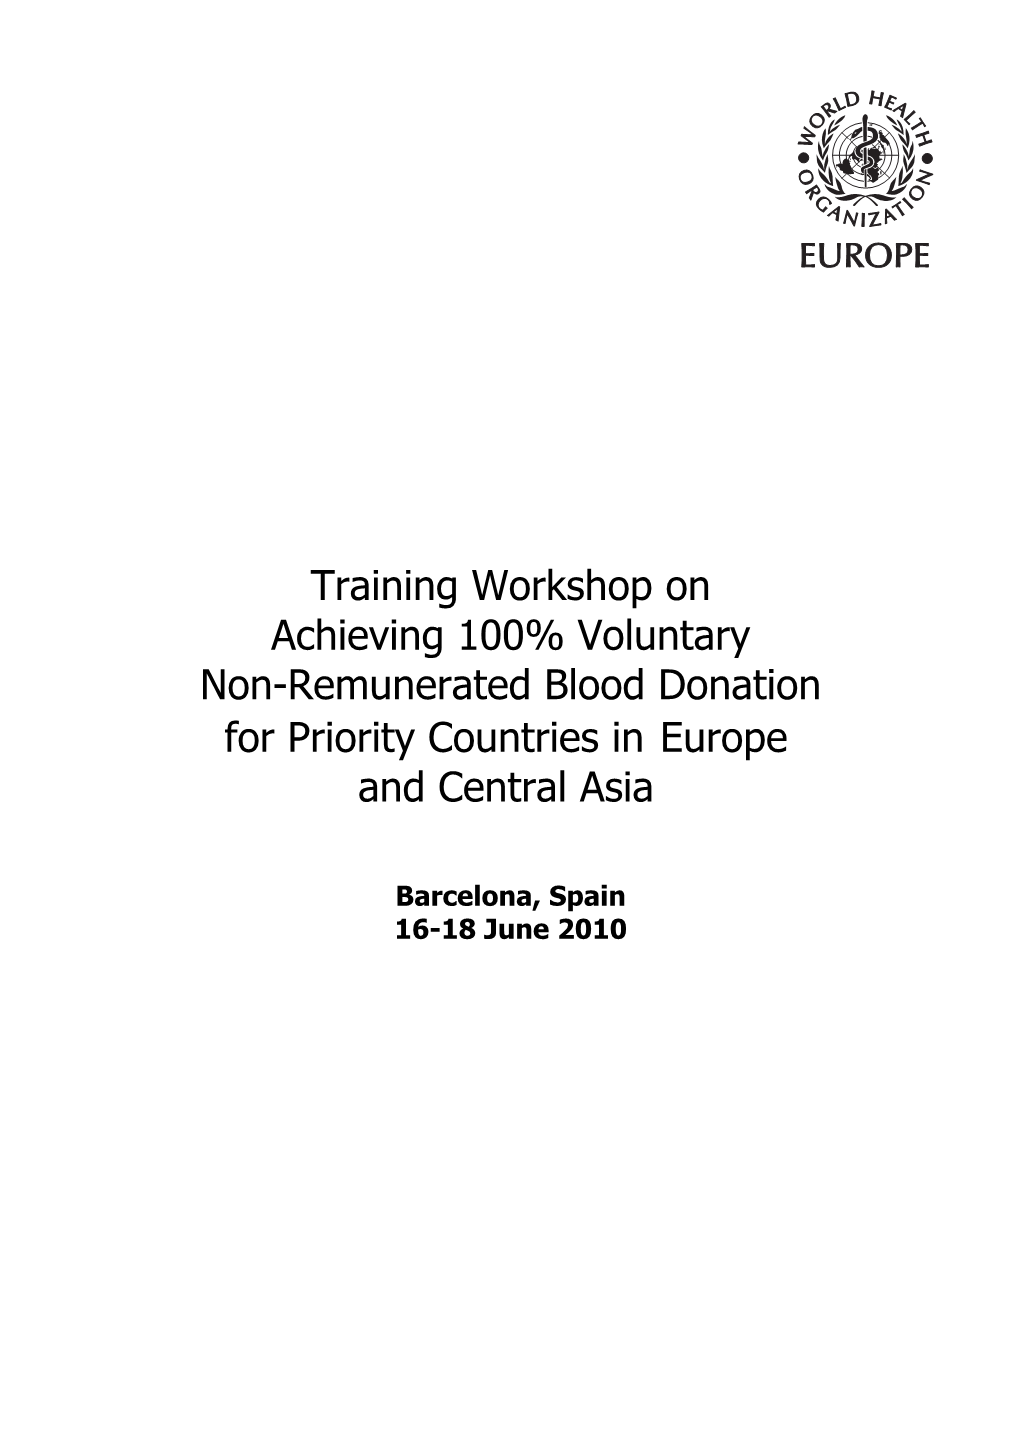 Training Workshop on Achieving 100% Voluntary Non-Remunerated Blood Donation for Priority Countries in Europe and Central Asia